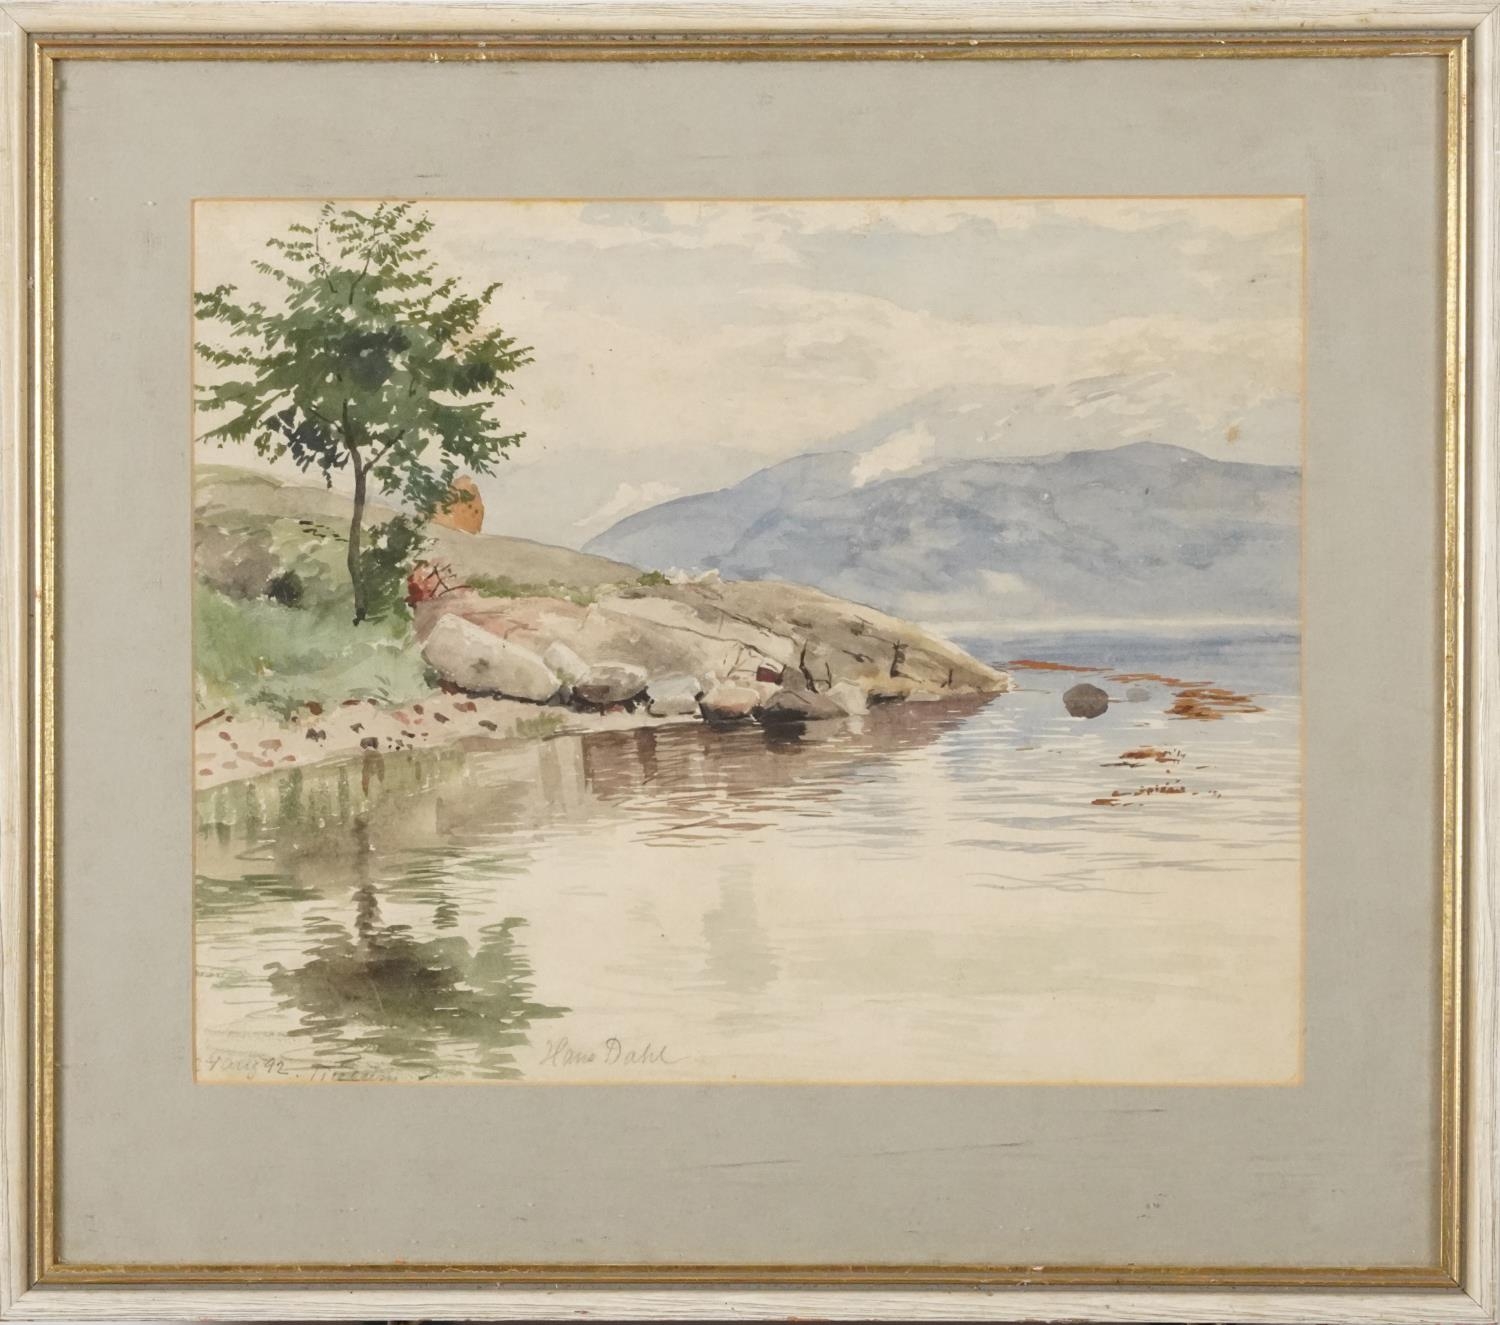 Hans Dahl 1892 - Lake scene, late 19th century Norwegian school watercolour, mounted, framed and - Image 2 of 4